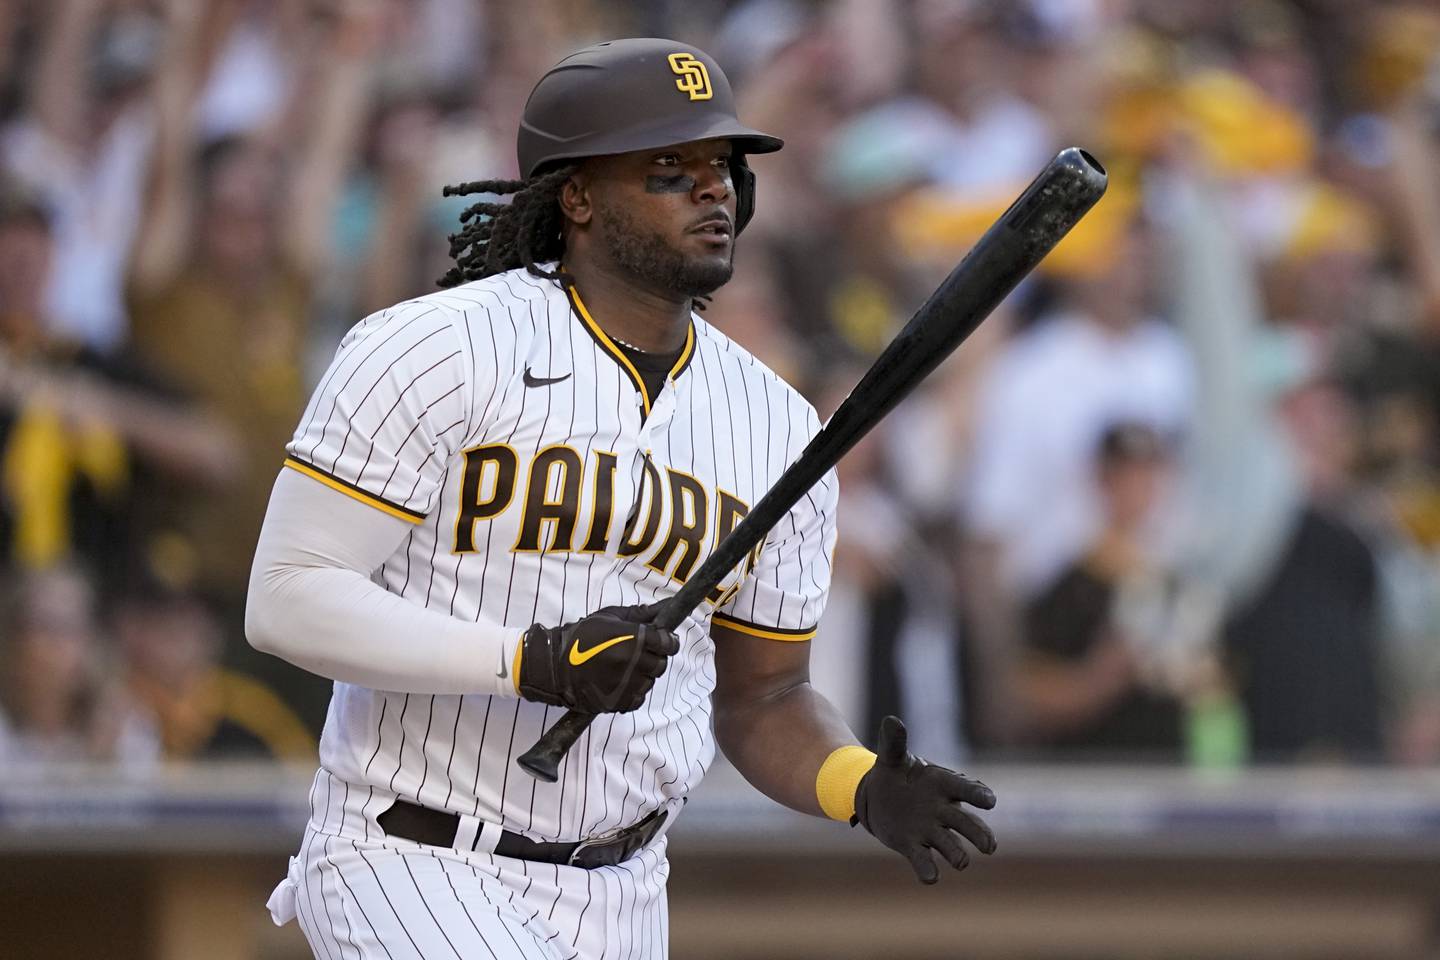 The Padres' Josh Bell watches his RBI single during the fifth inning against the Phillies on Oct. 19, 2022.